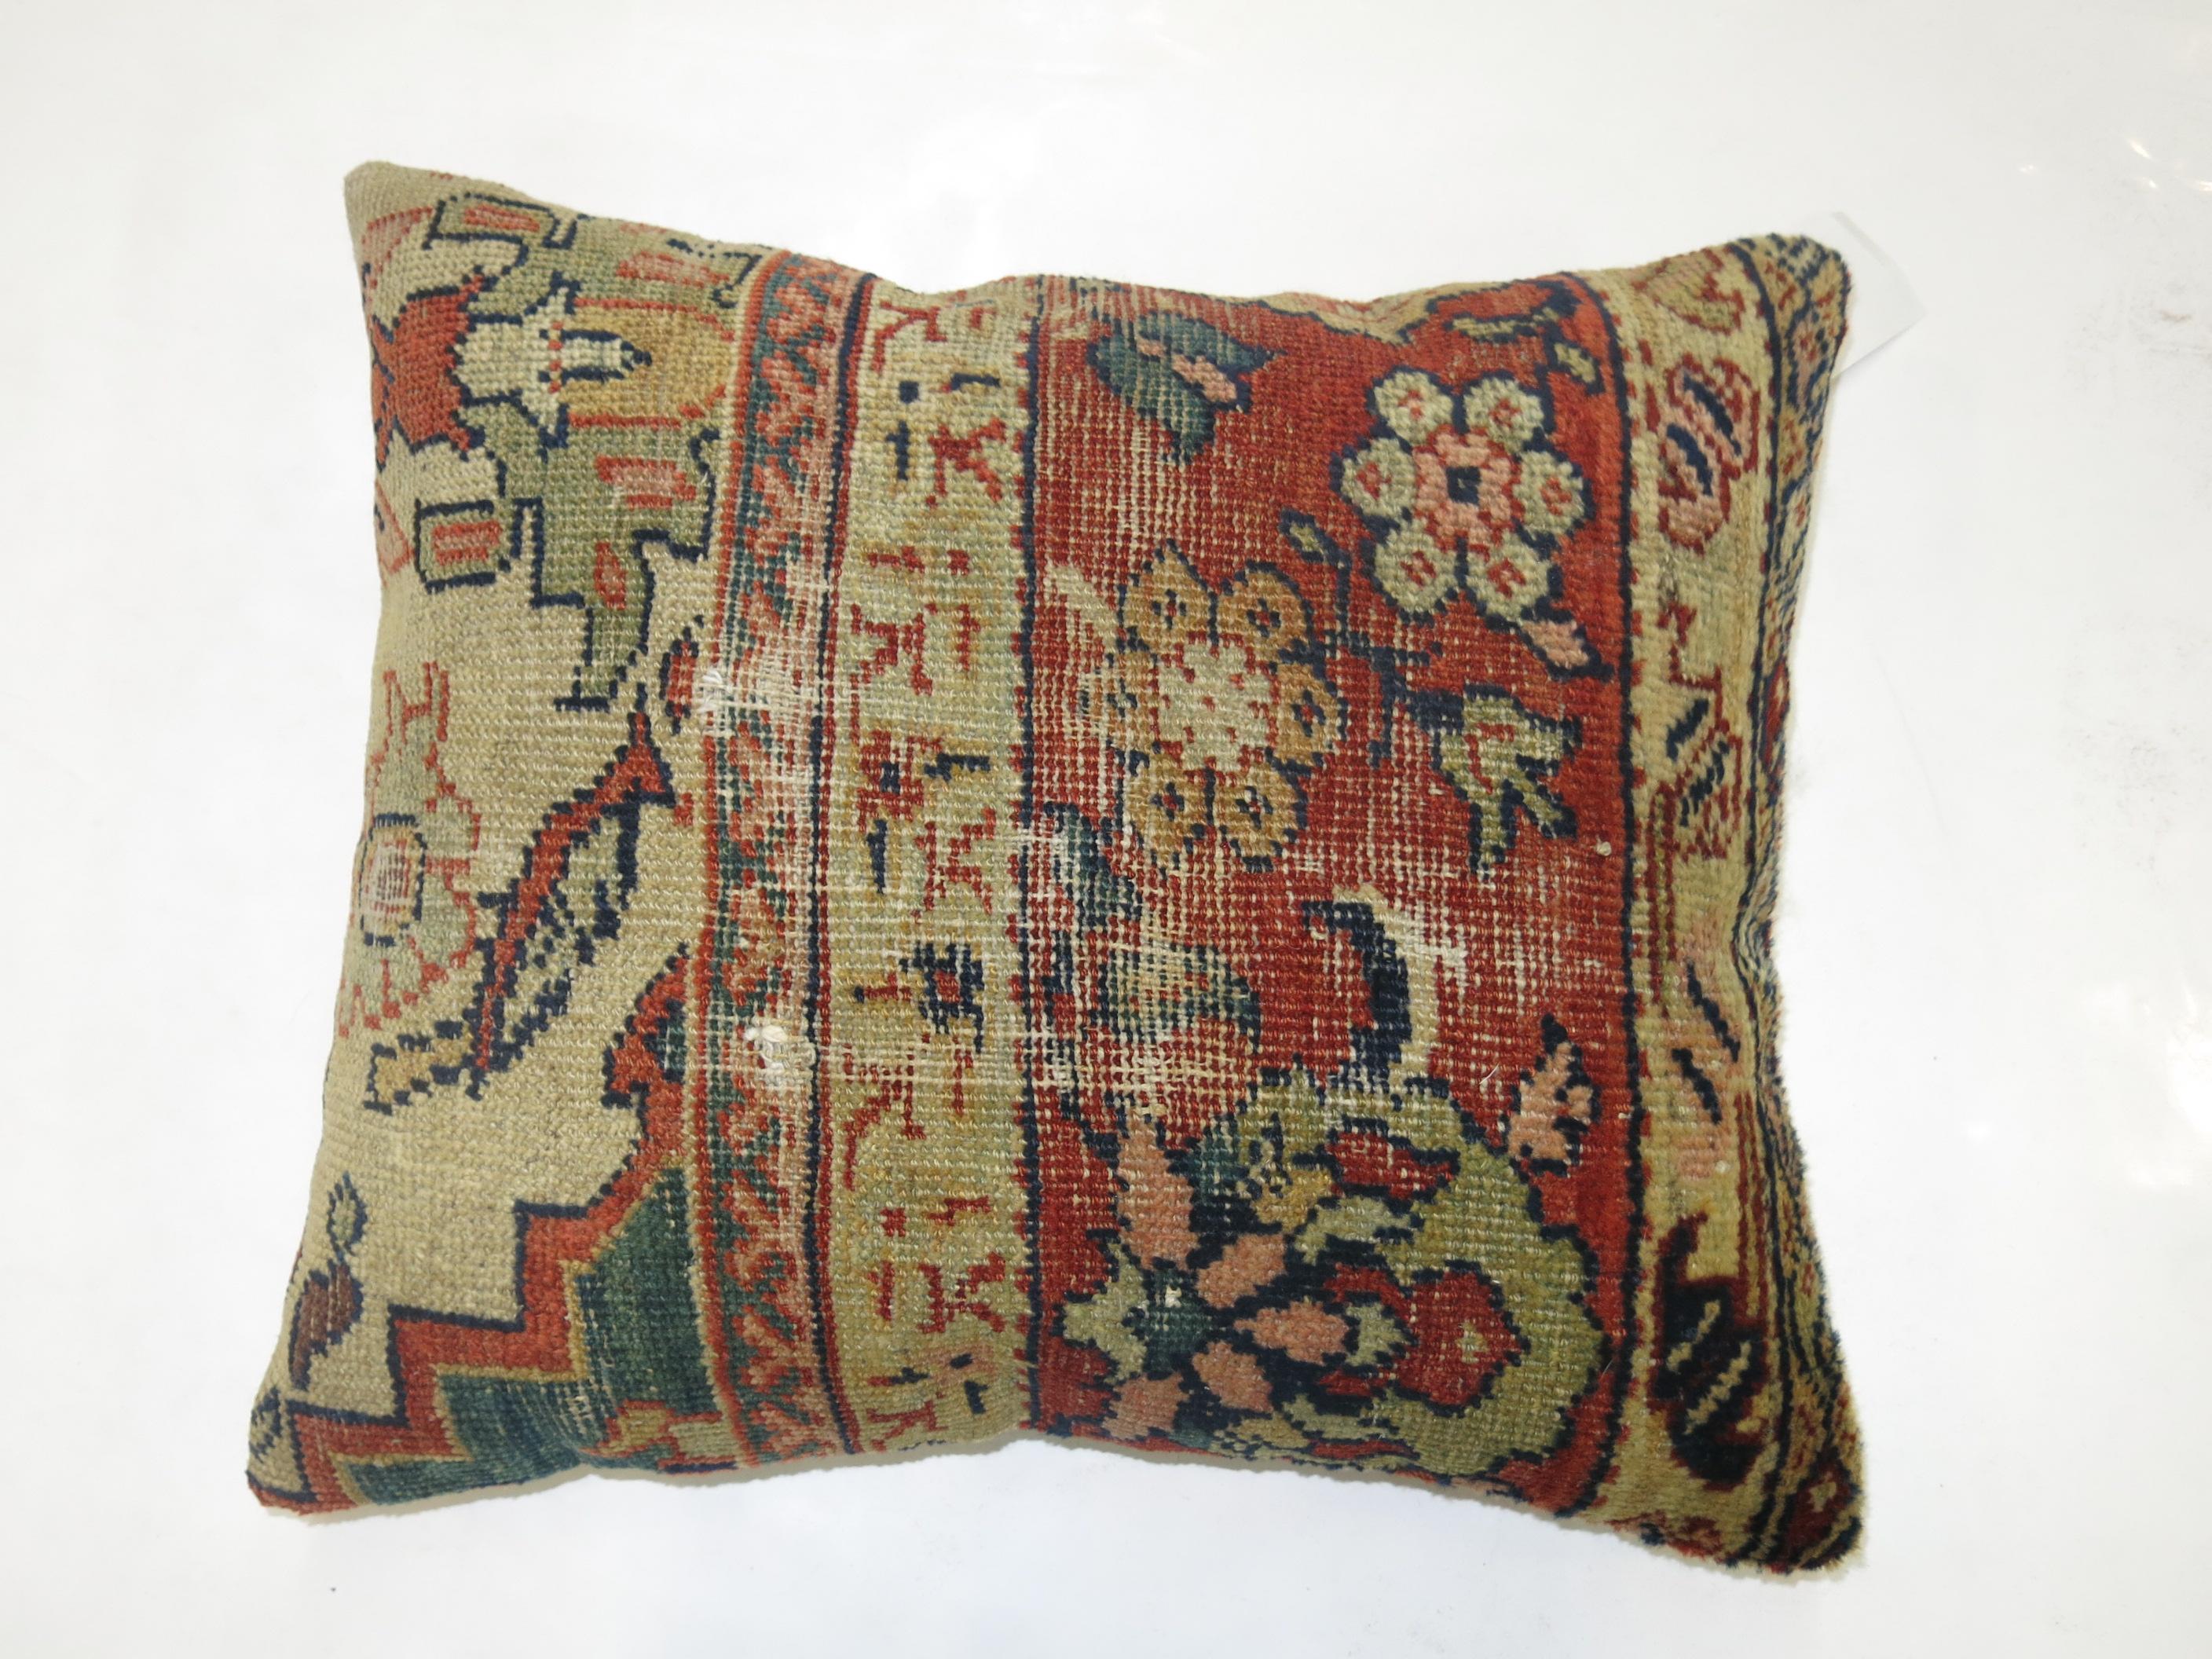 Sultanabad Worn Antique Persian Mahal Pillow For Sale